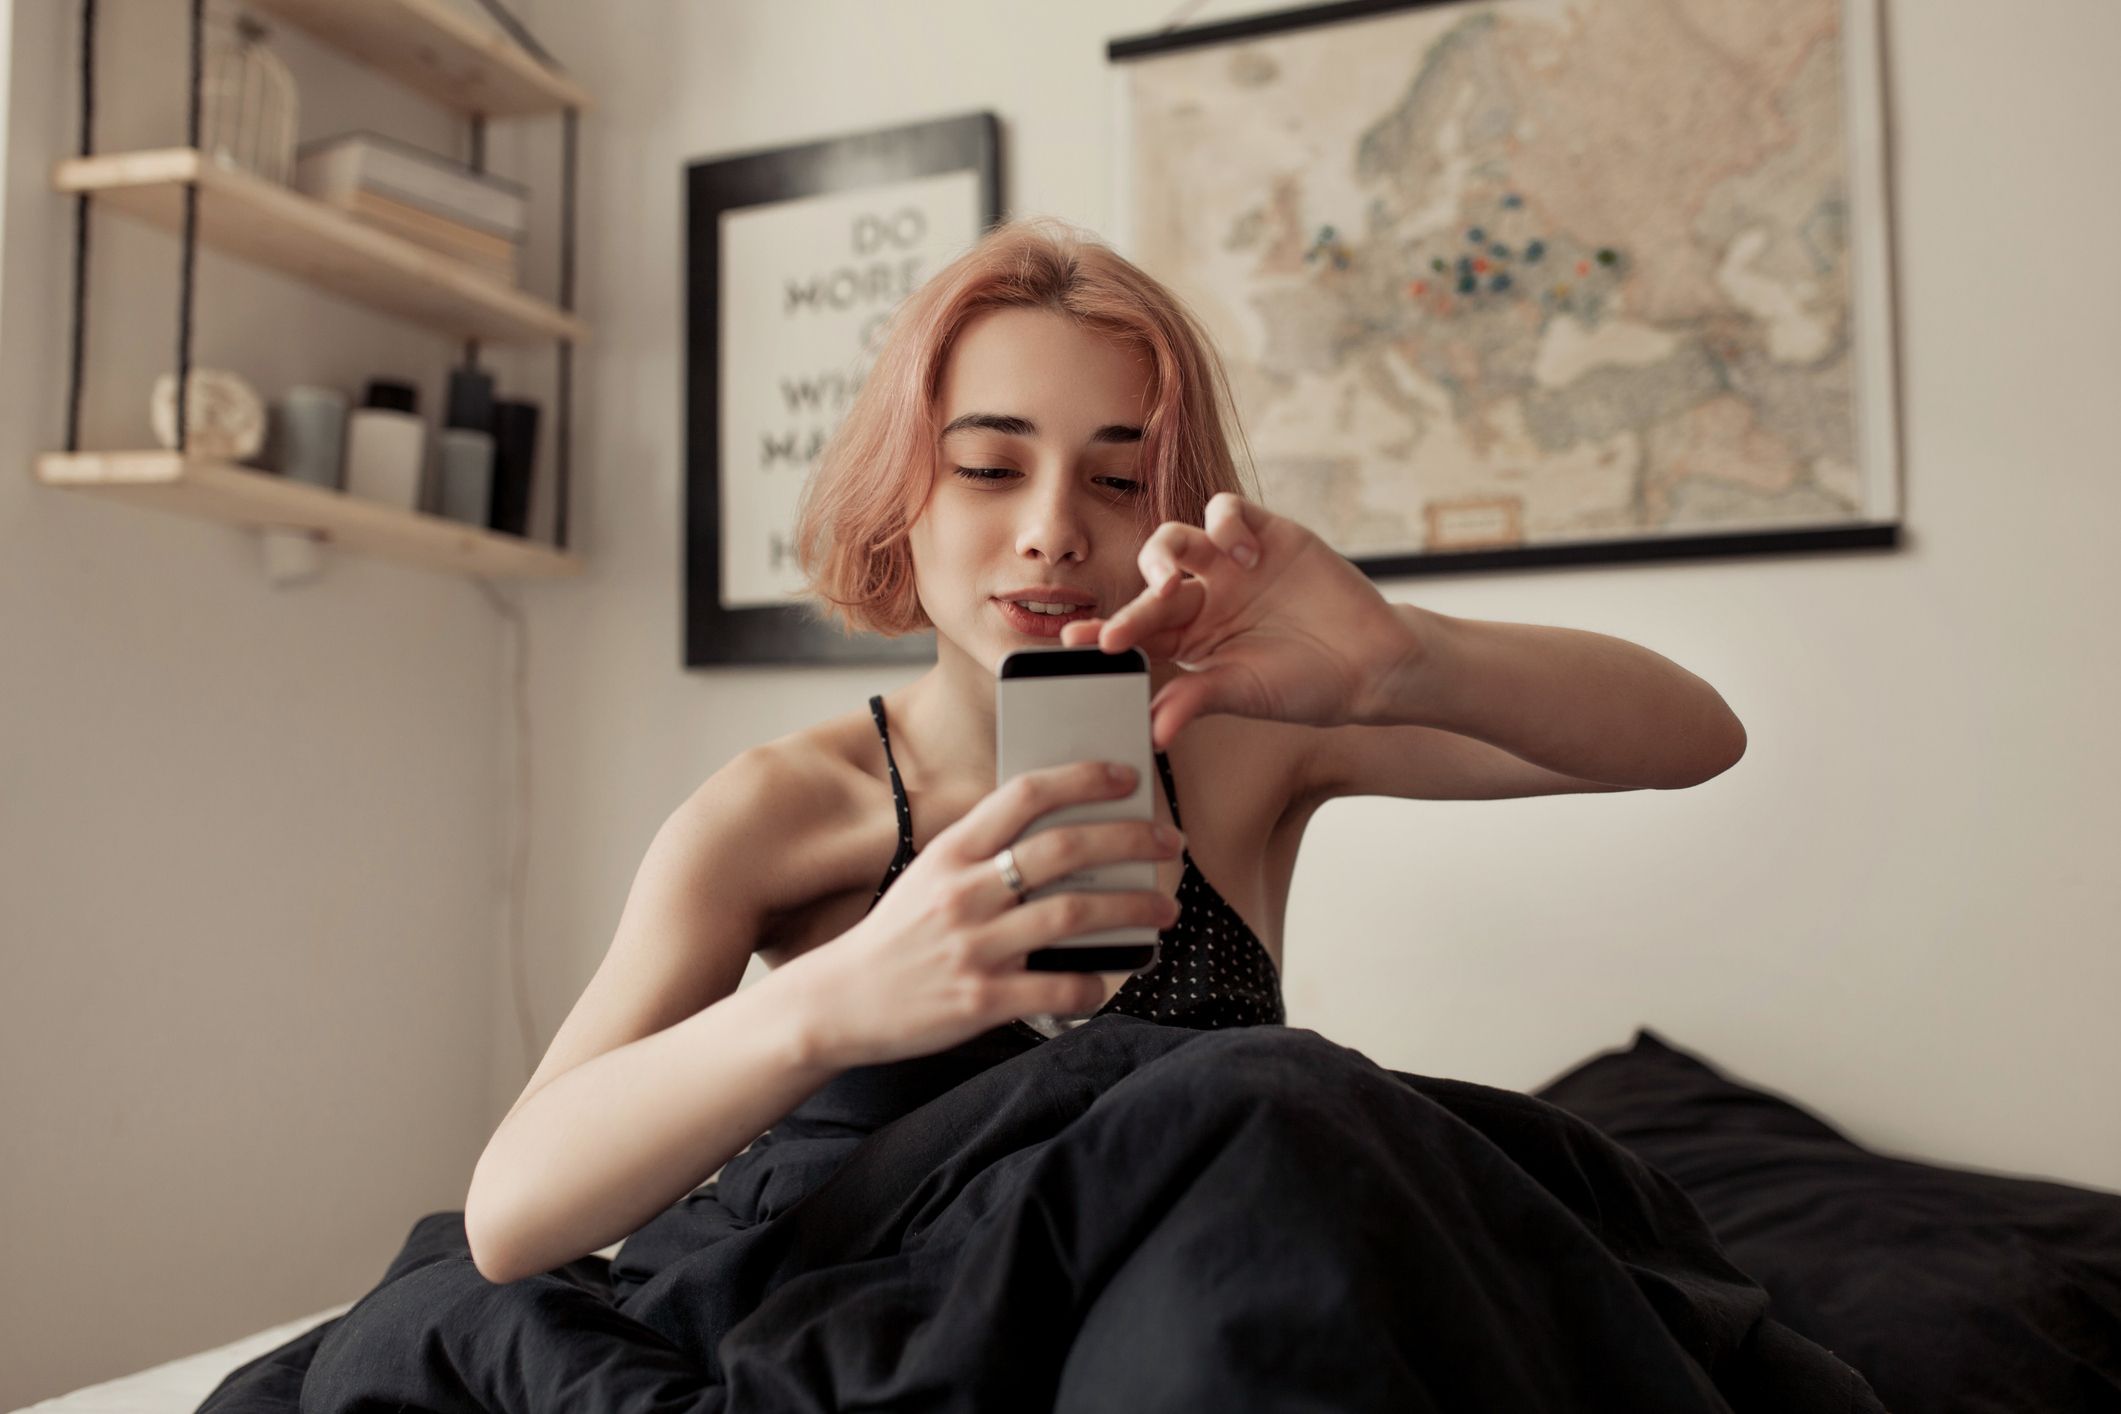 manager orkest Sluit een verzekering af Here's How to Sext on Snapchat Like a Pro - Tips on Snapchat Sexting